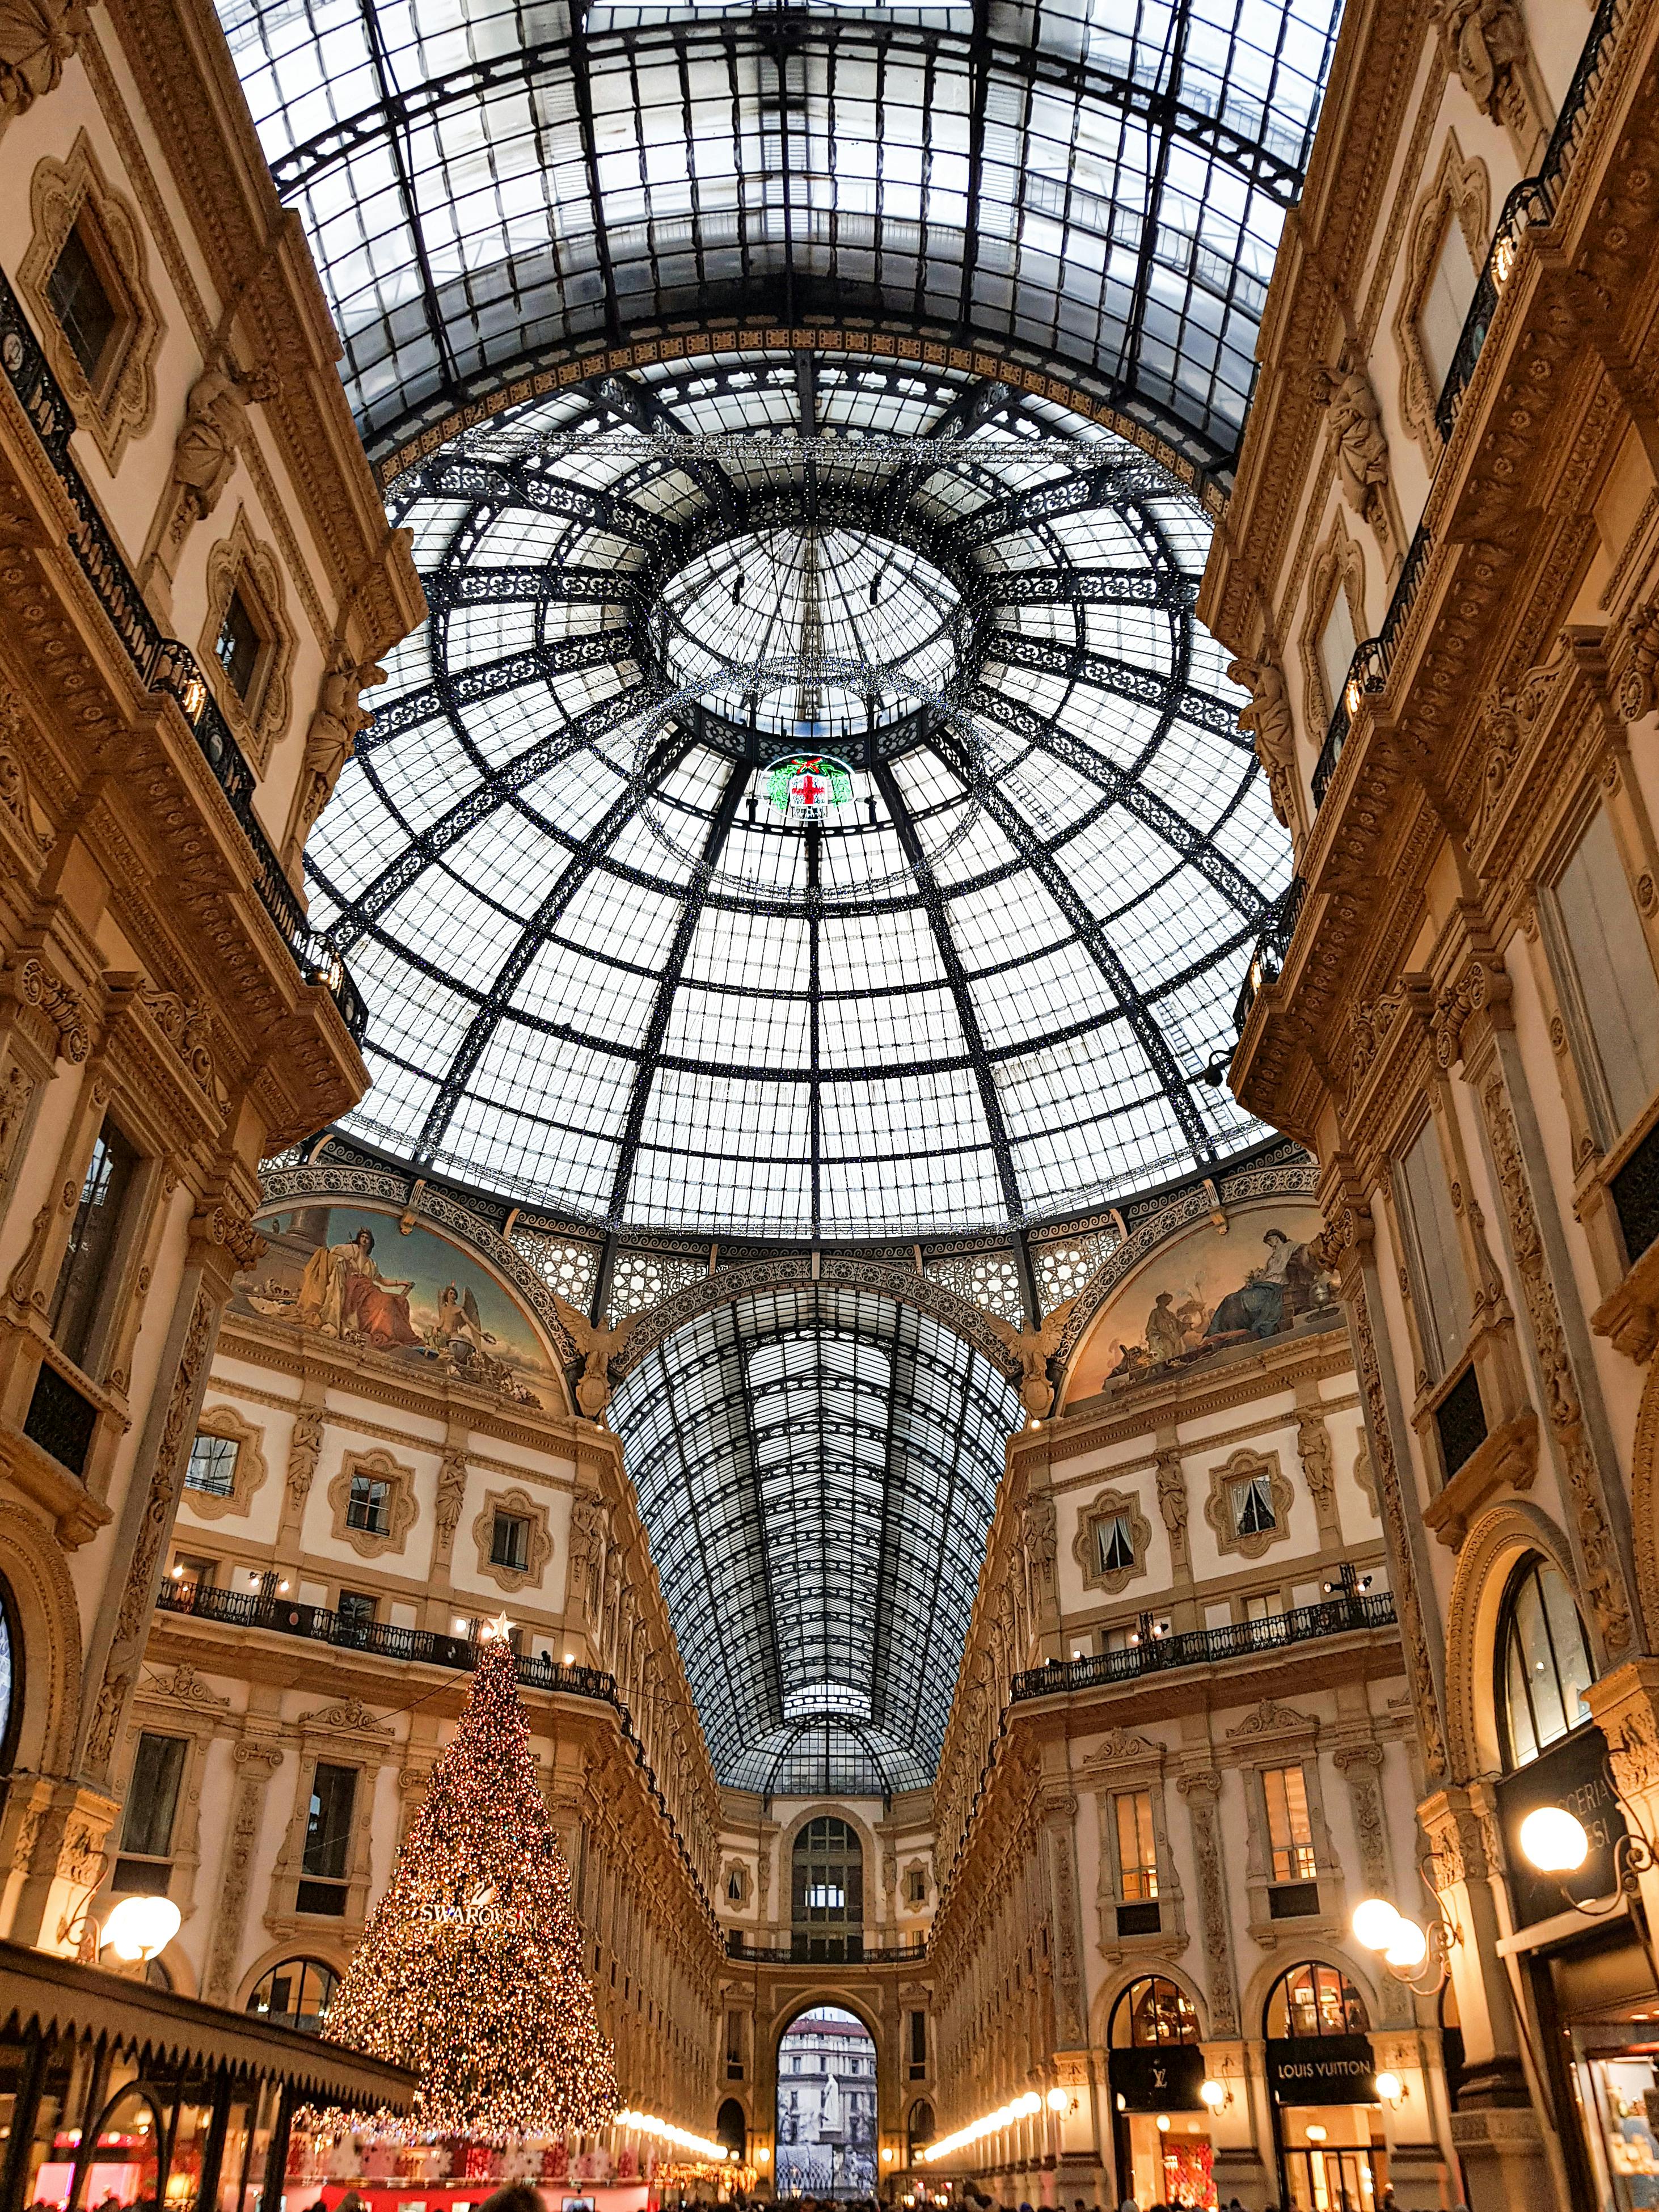 A Louis Vuitton Outlet At Galleria Vittorio Emanuele II, Milan Stock Photo,  Picture and Royalty Free Image. Image 156914335.